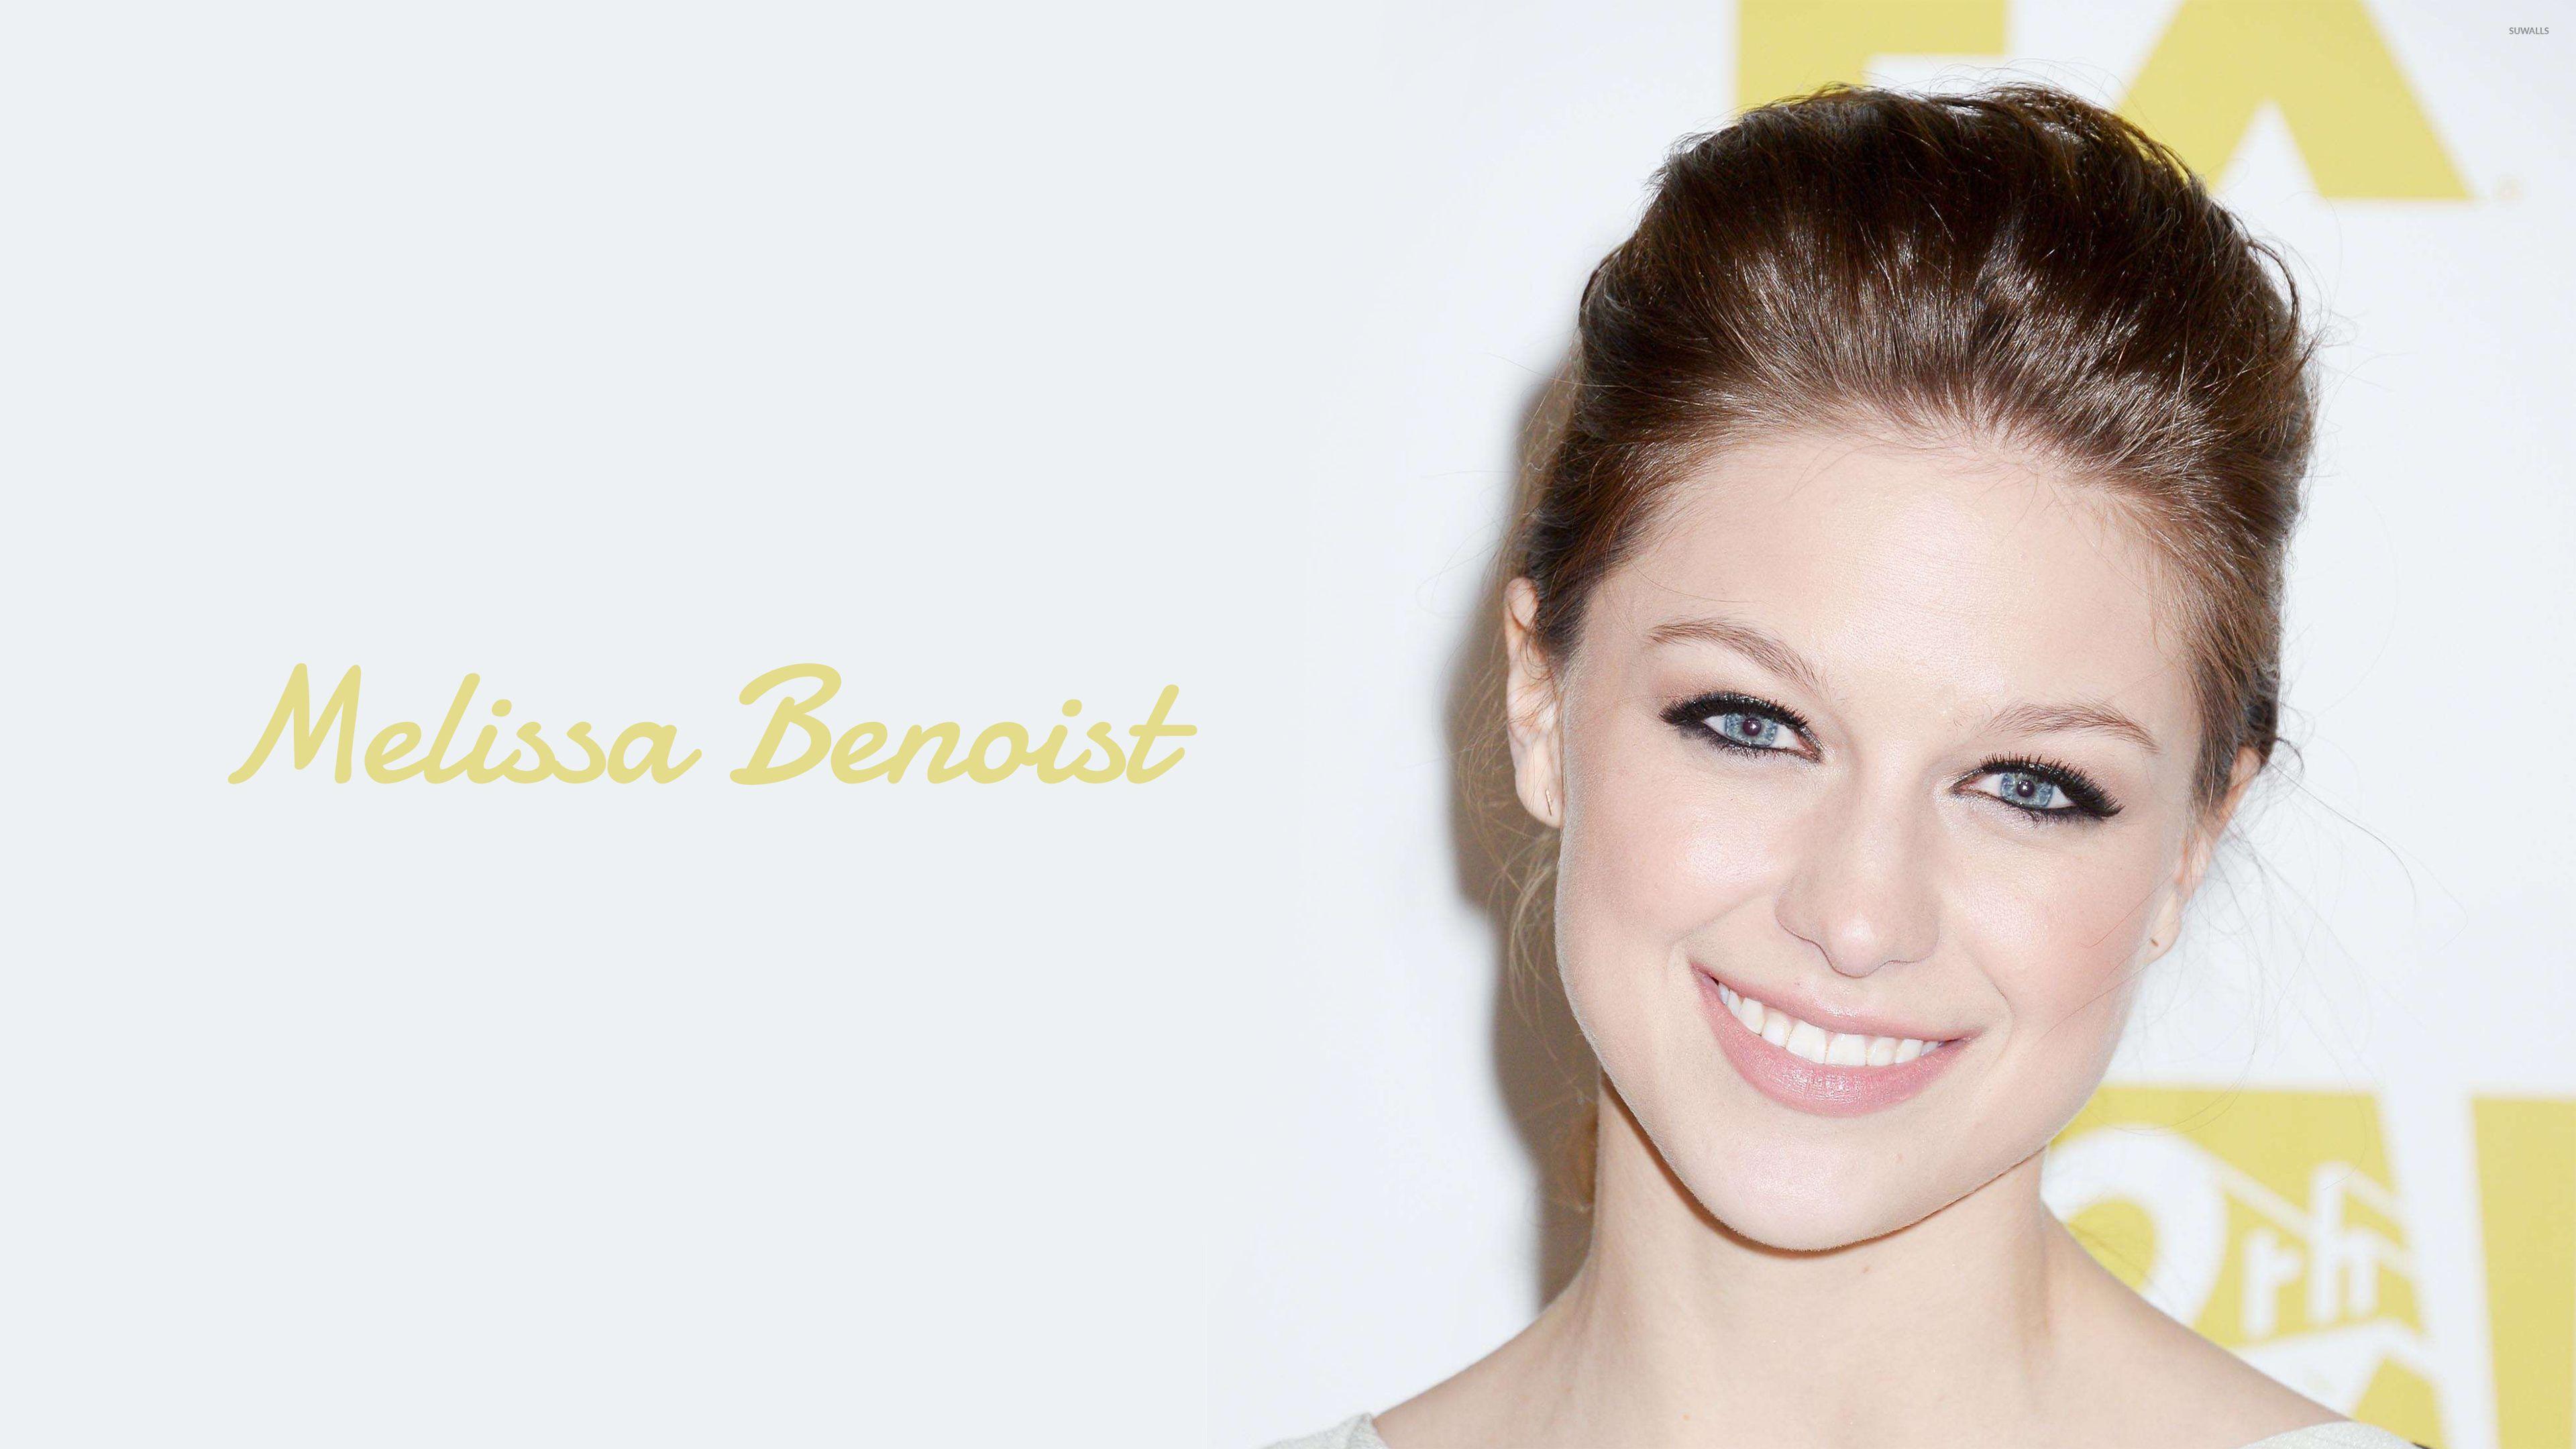 Melissa Benoist in a white shirt and jeans wallpaper